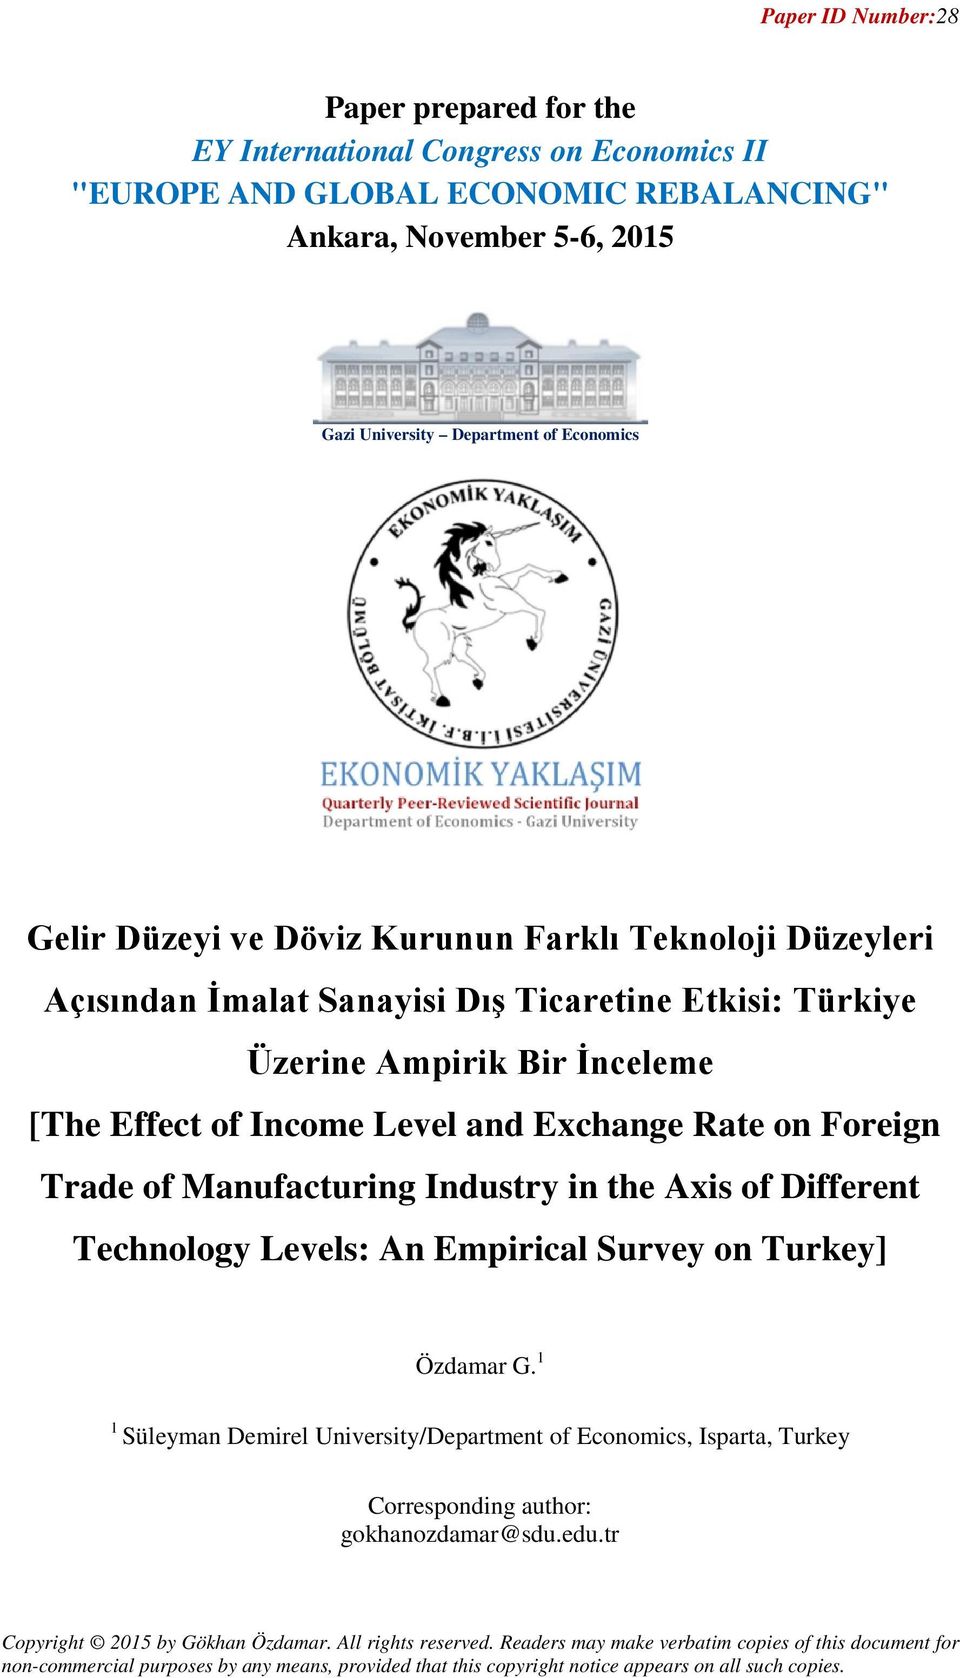 of Manufacturing Industry in the Axis of Different Technology Levels: An Empirical Survey on Turkey] Özdamar G.